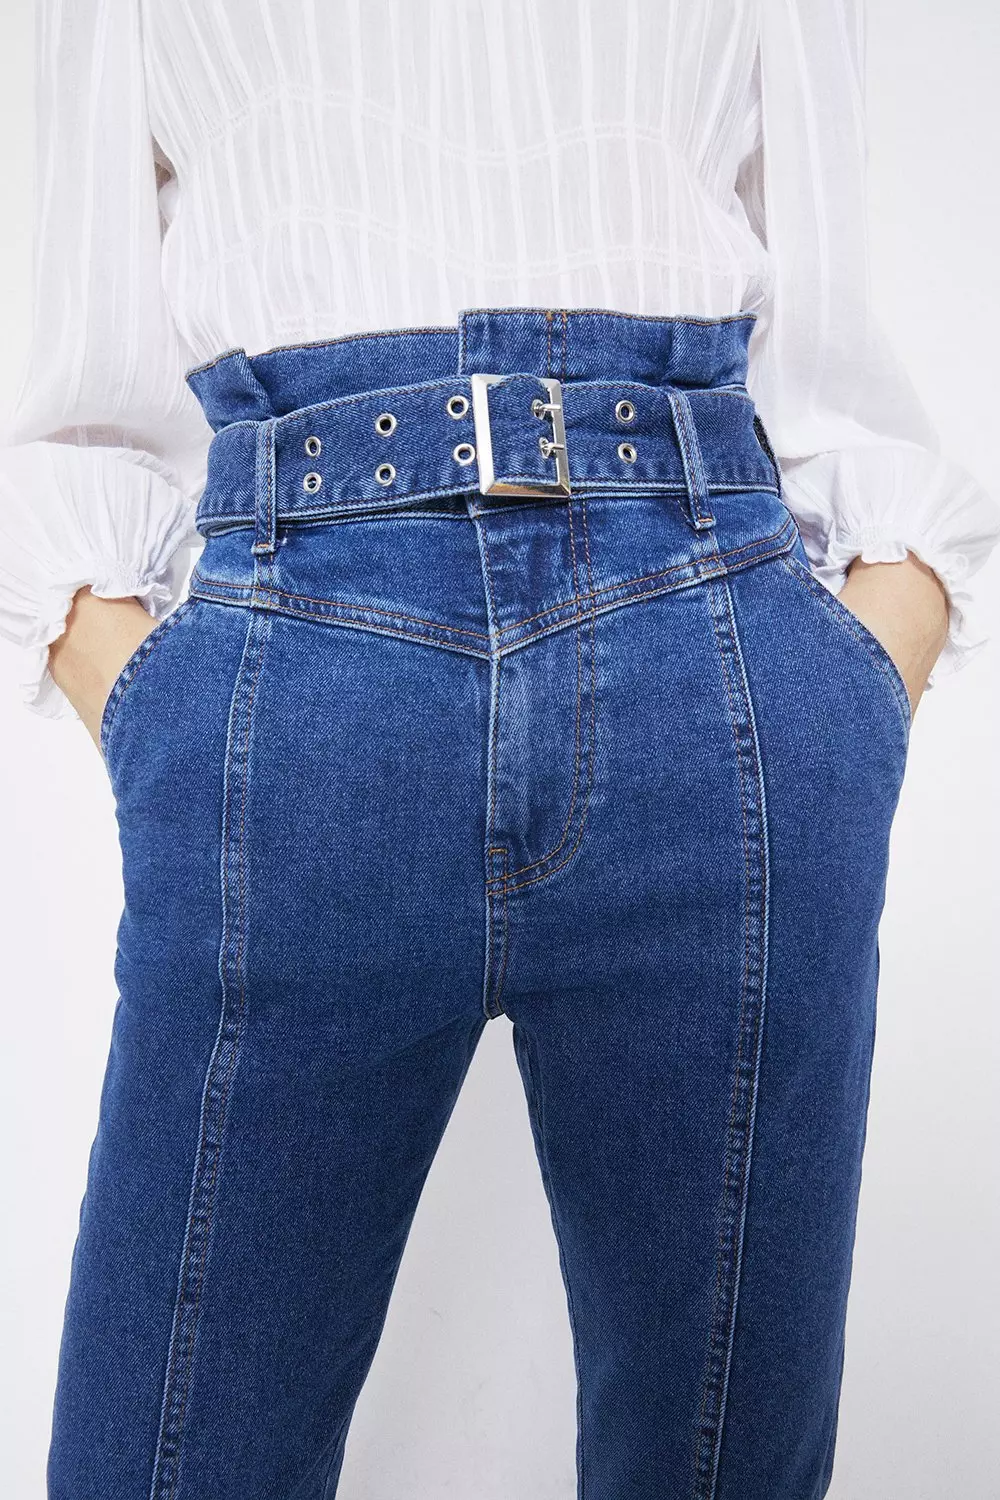 Belted High Waisted Skinny Jeans | Warehouse